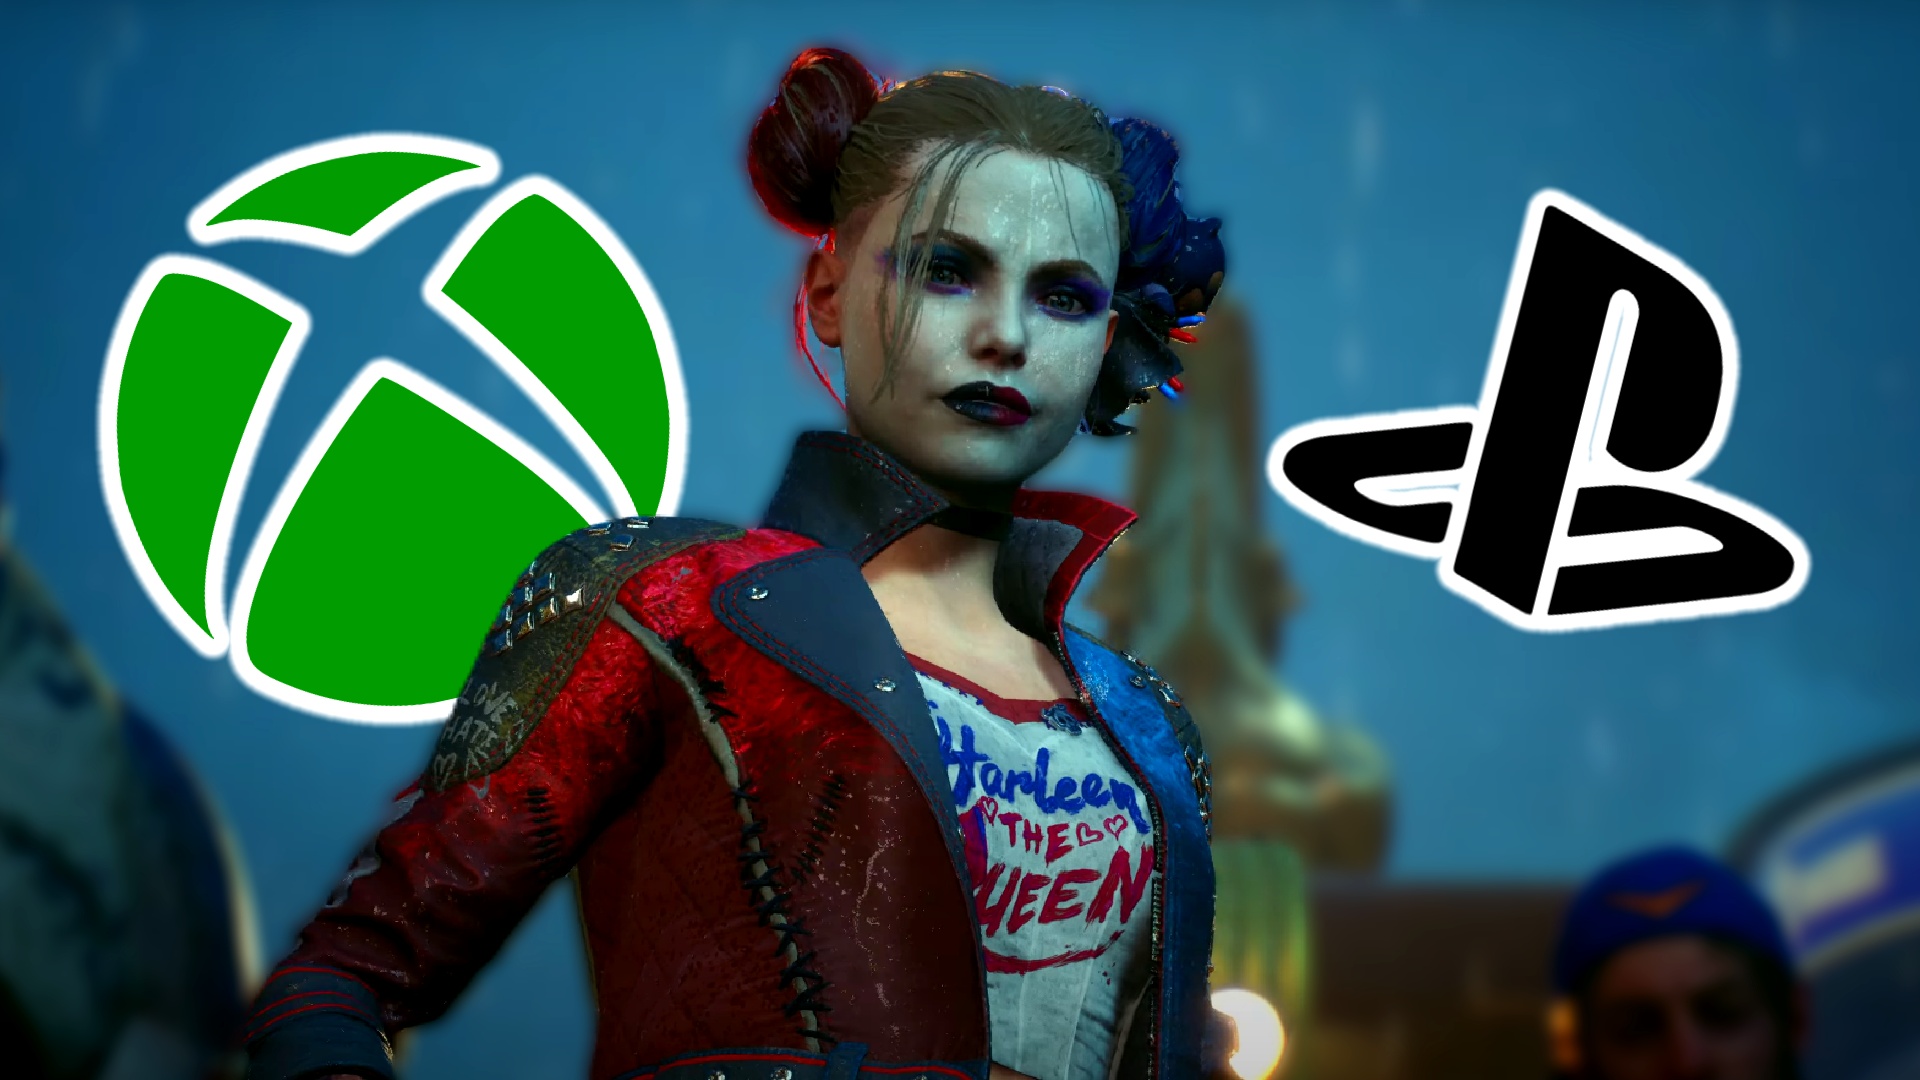 The Suicide Squad game is looking a lot like Marvel's Avengers